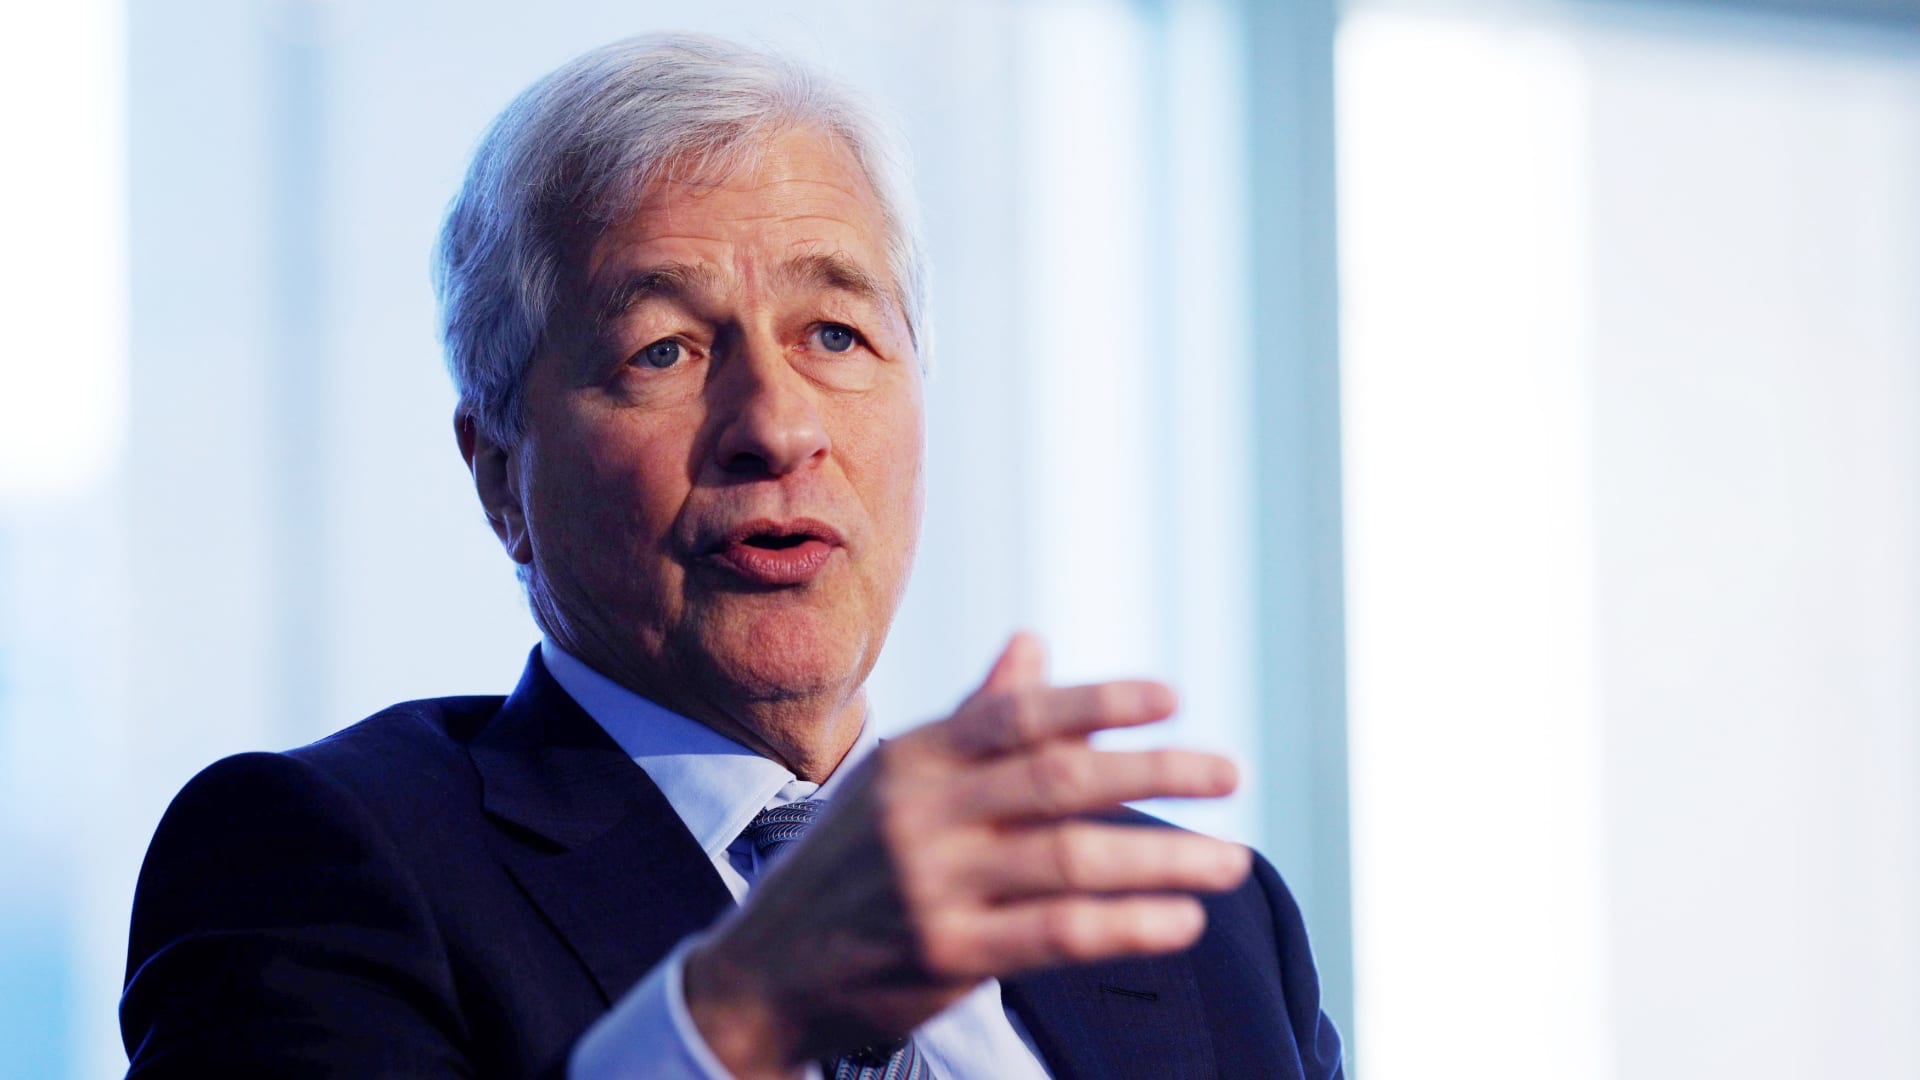 JPMorgan Chase tells employees the bank will pay for travel to states that allow..